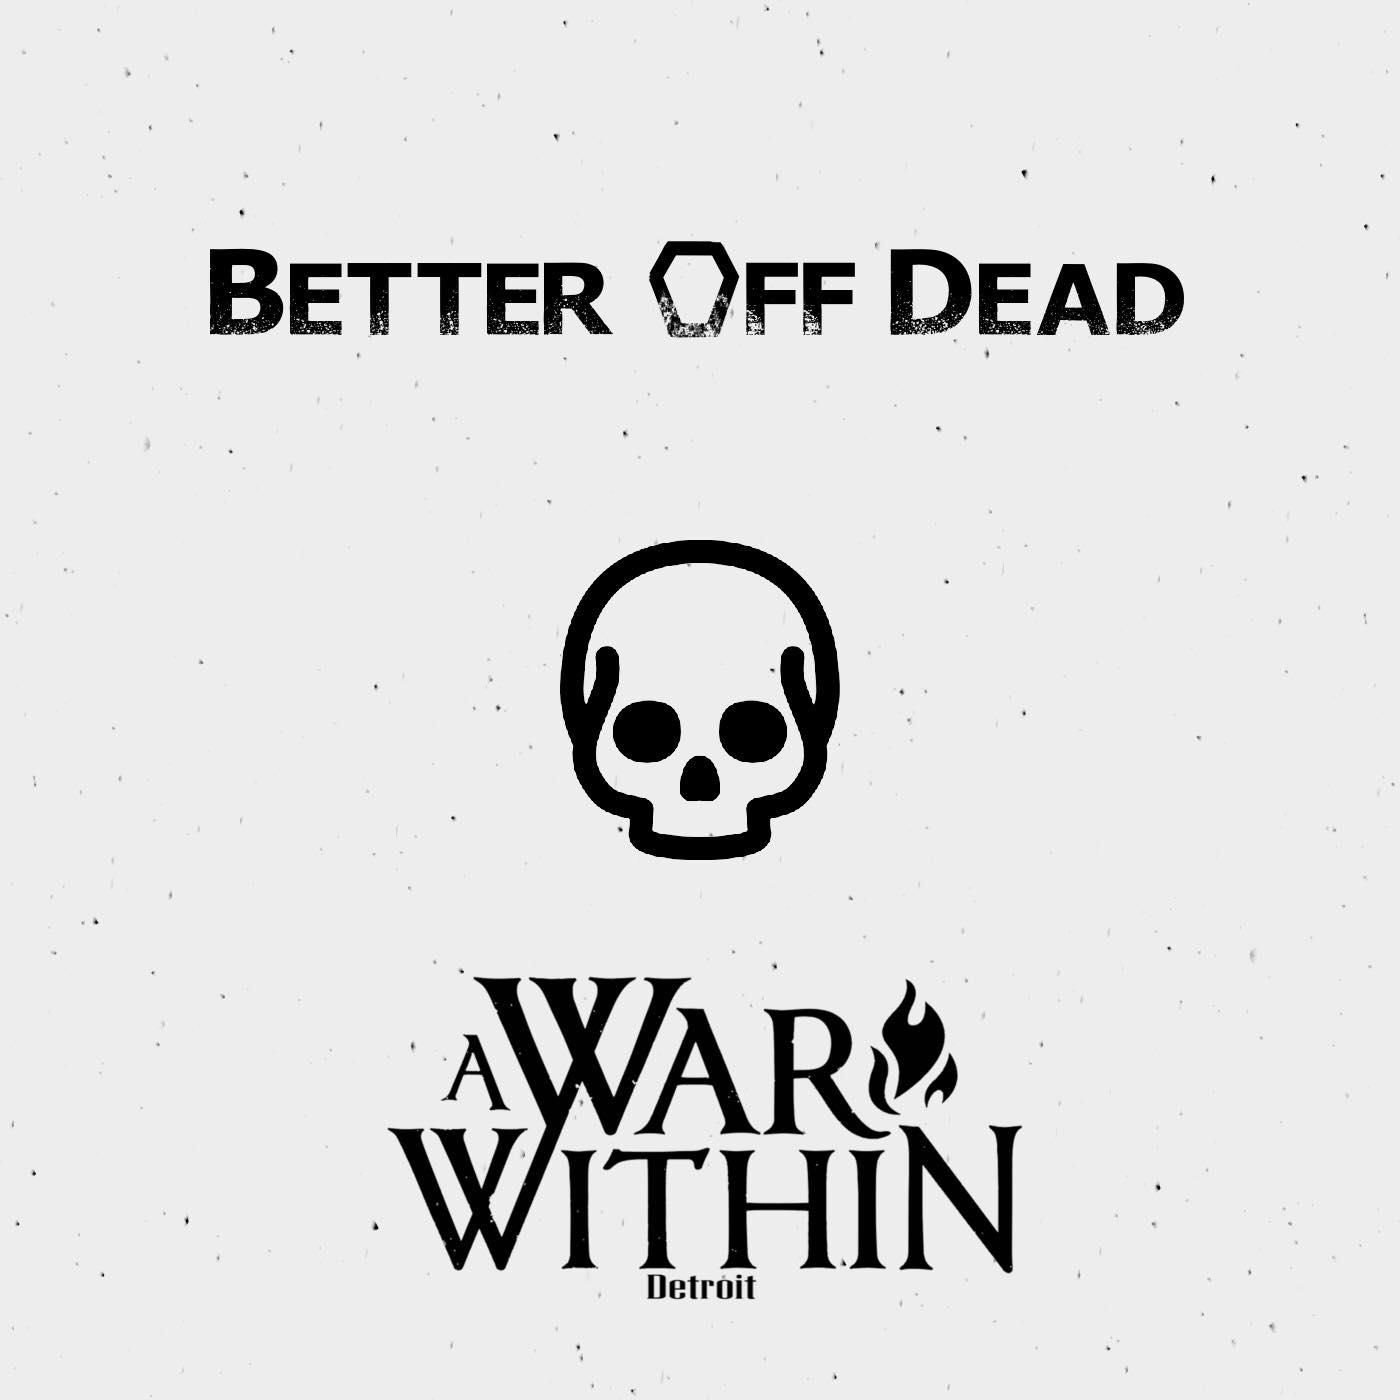 Better off Dead. Better off Yeat. Аватарка better off Dead. I'M better off Dead. The best within